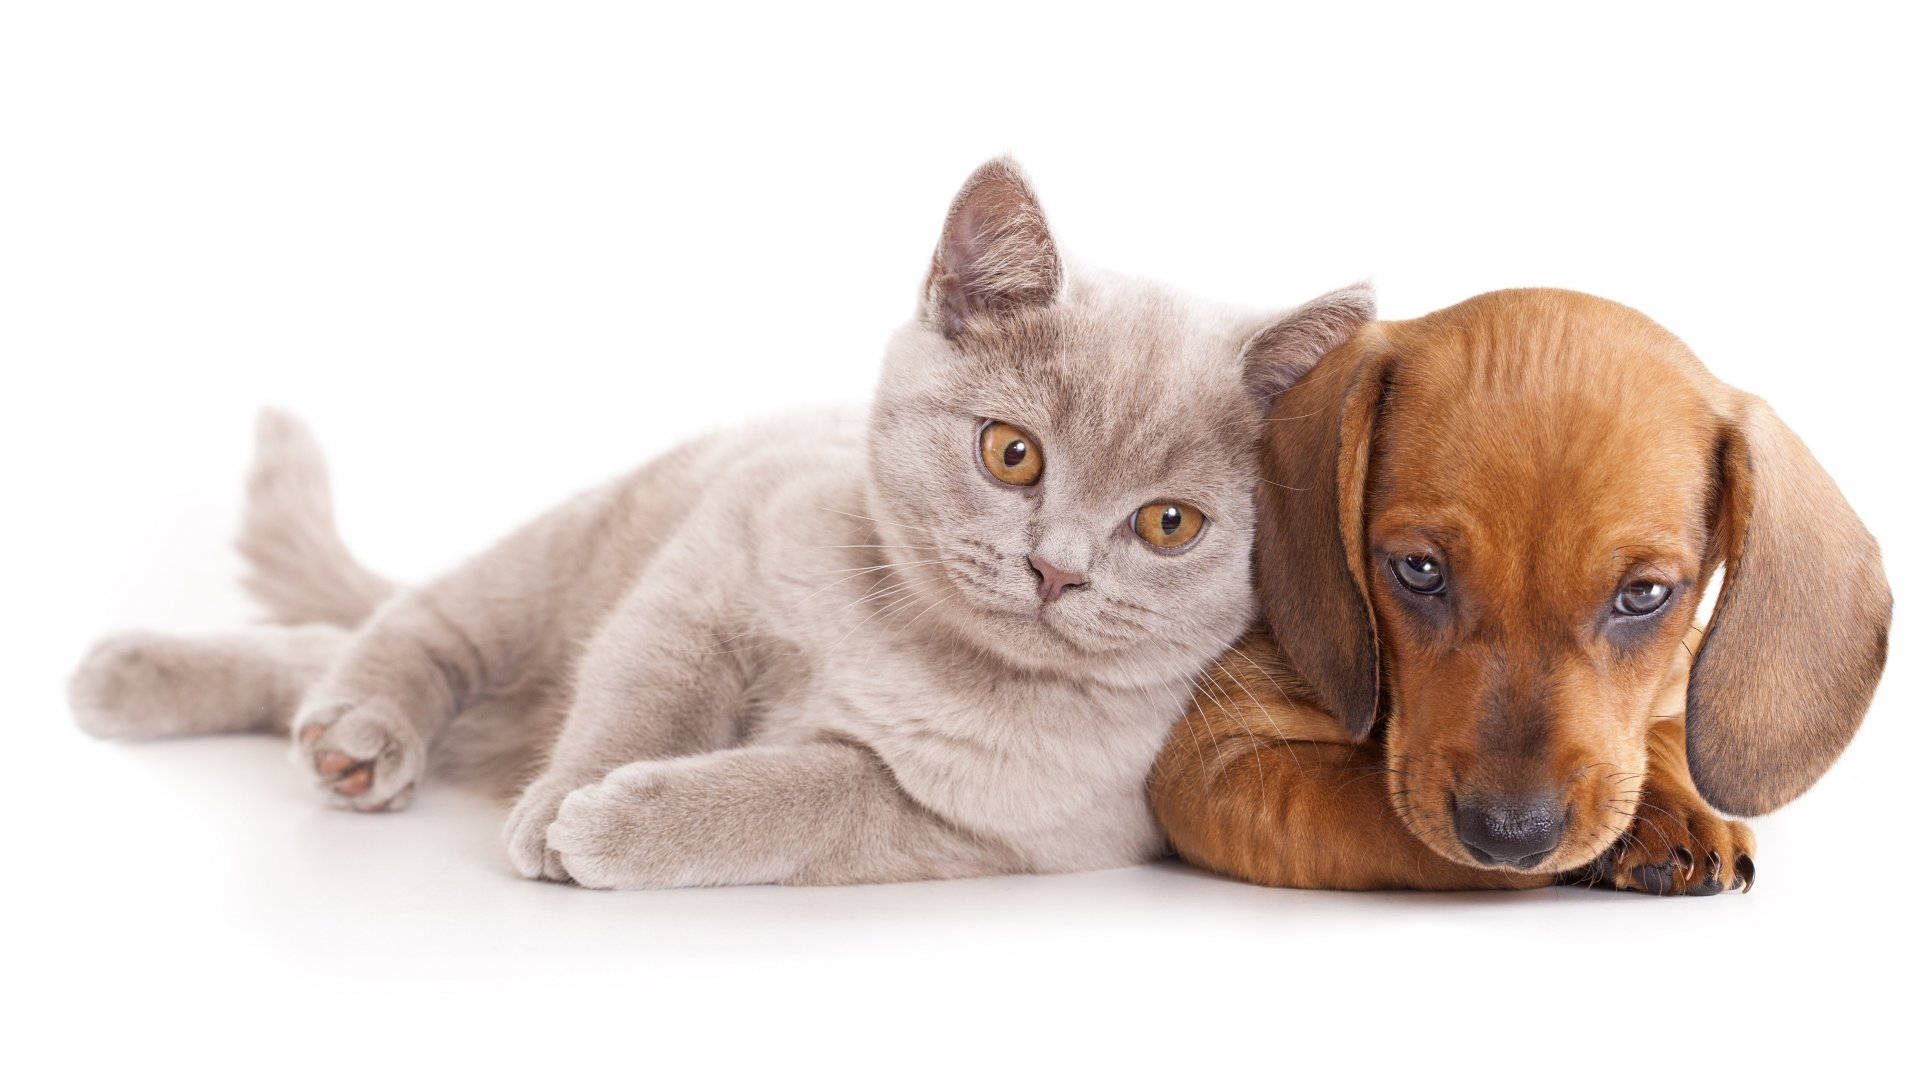 Cat And Dog Leaning Wallpaper